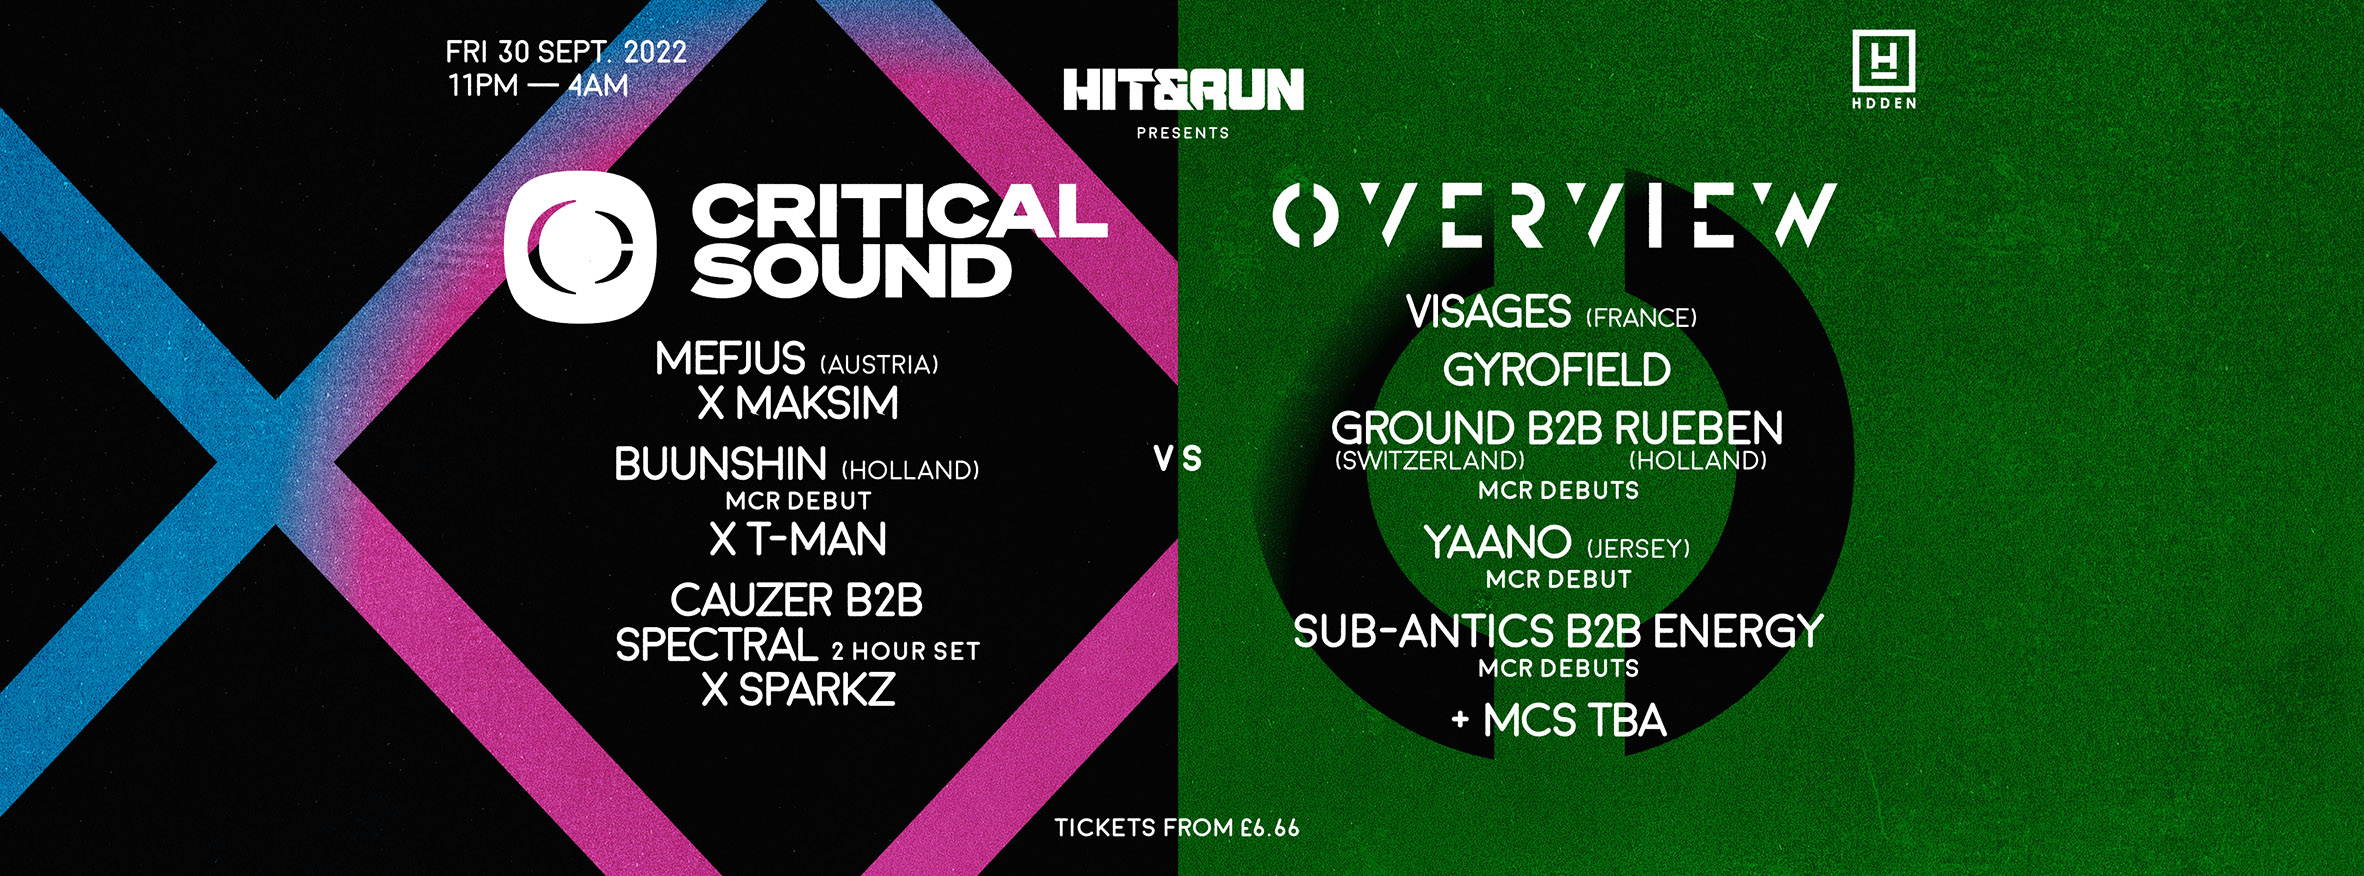 Hit & Run presents CRITICAL SOUND vs OVERVIEW - Flyer front